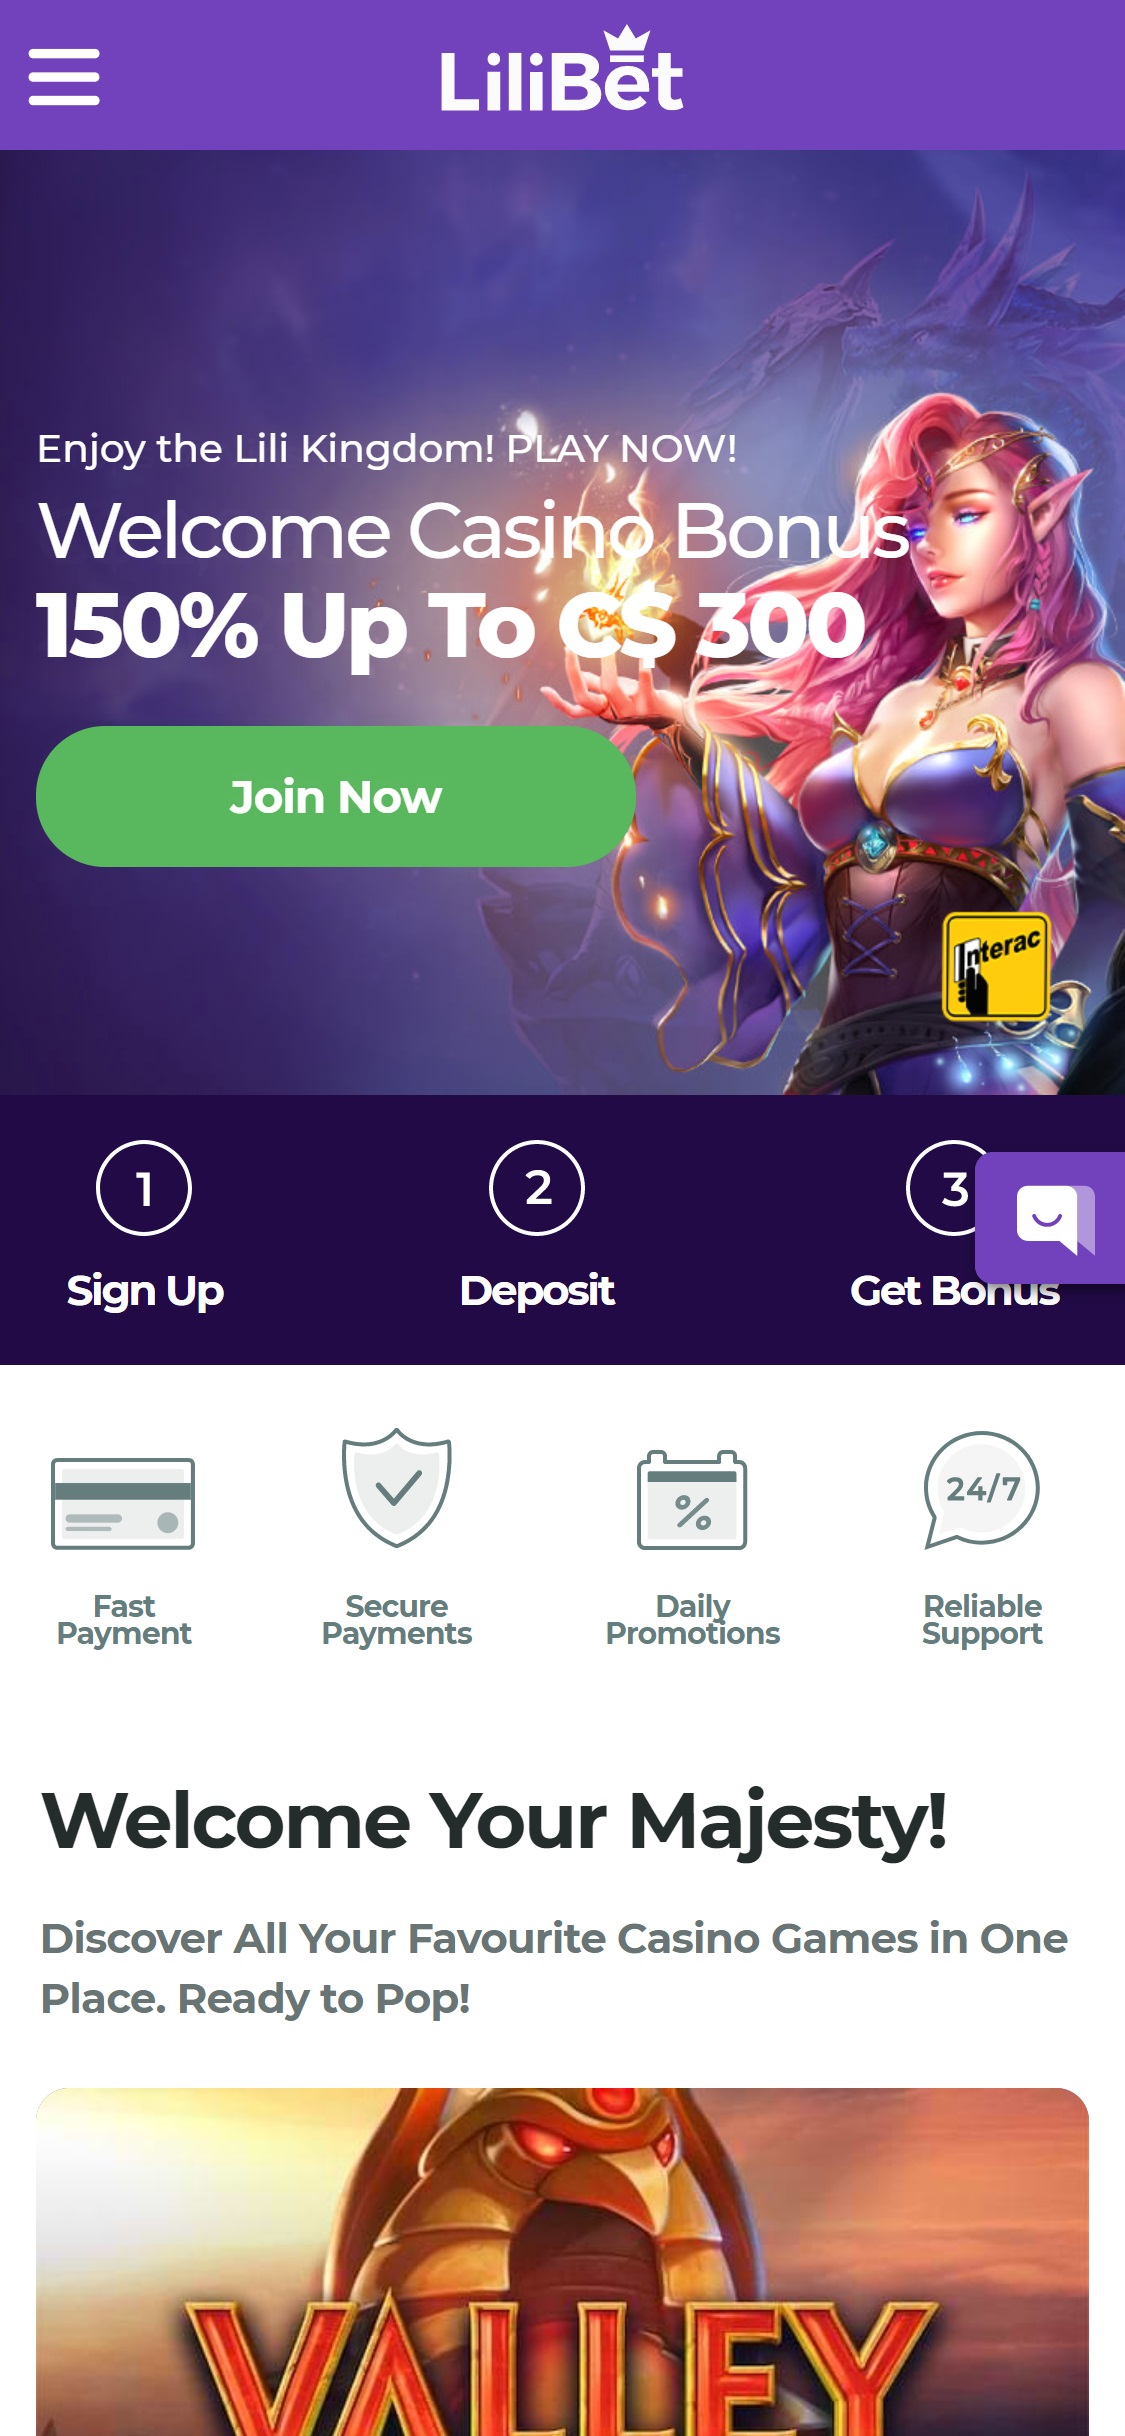 Lilibet Casino Mobile Review